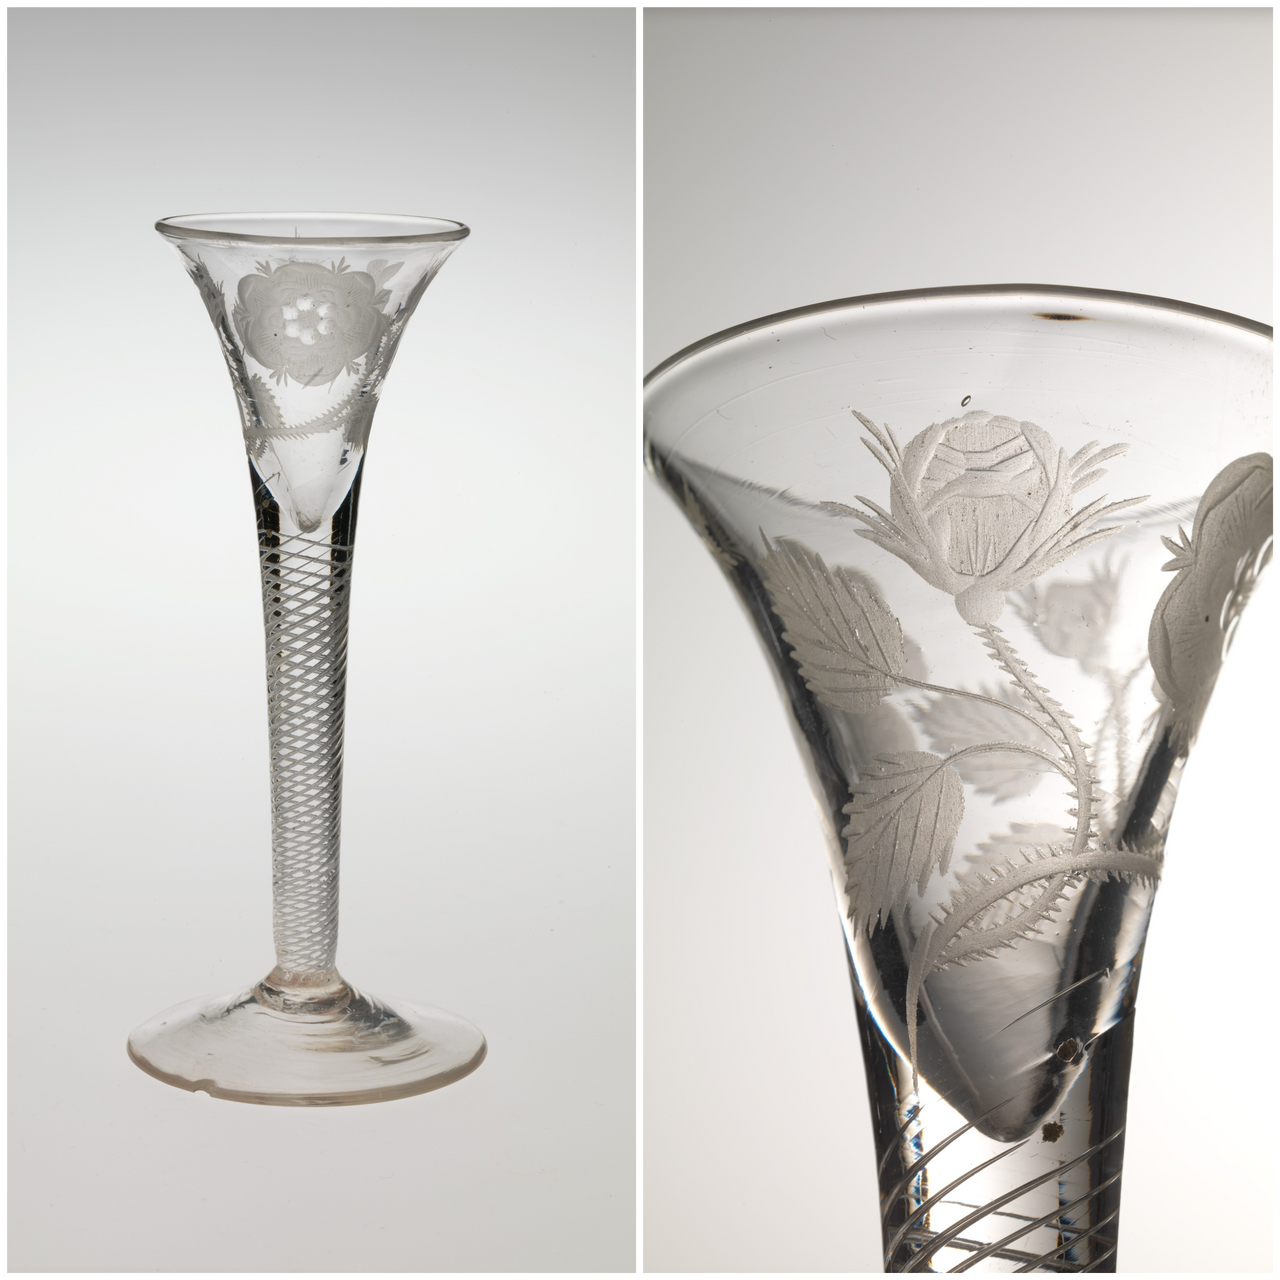 The emblems on this 18th-century wineglass declare the drinkers' devotion to a deposed king.